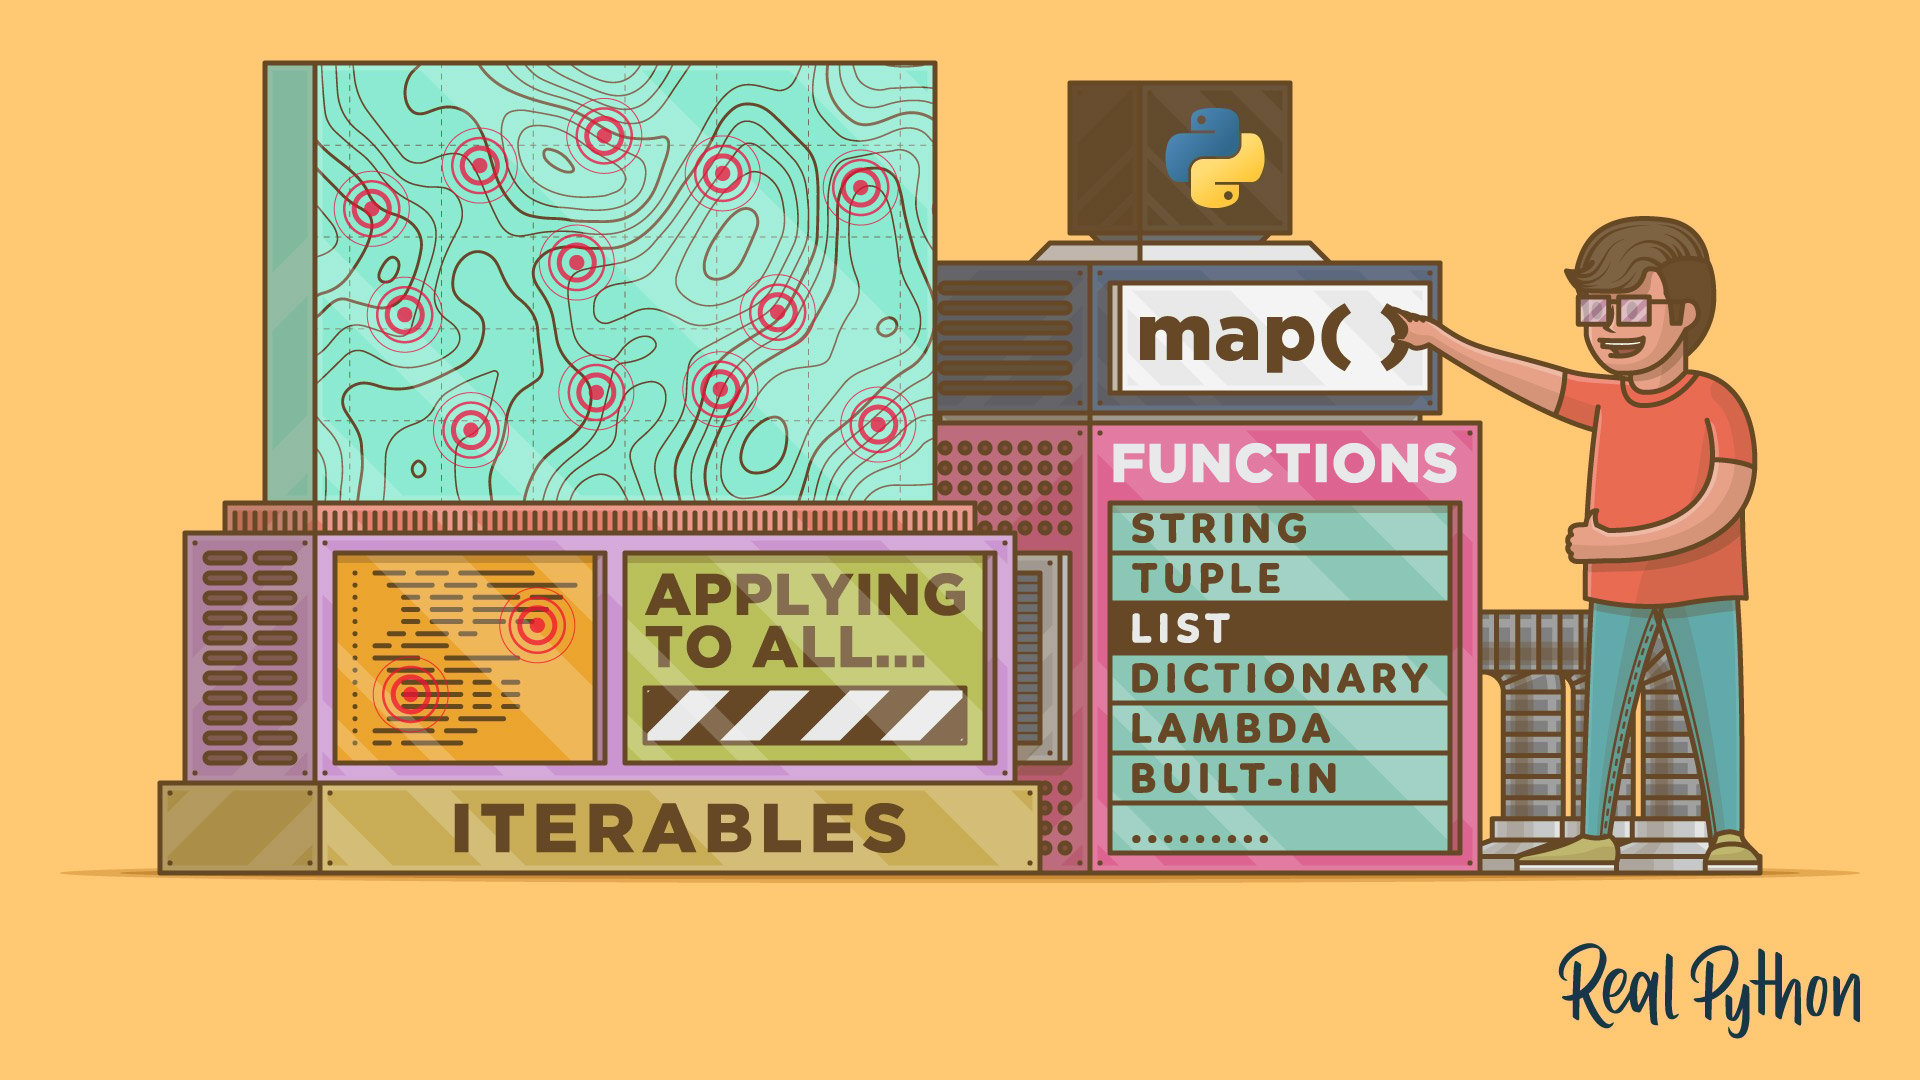 Python's map(): Processing Iterables Without a Loop